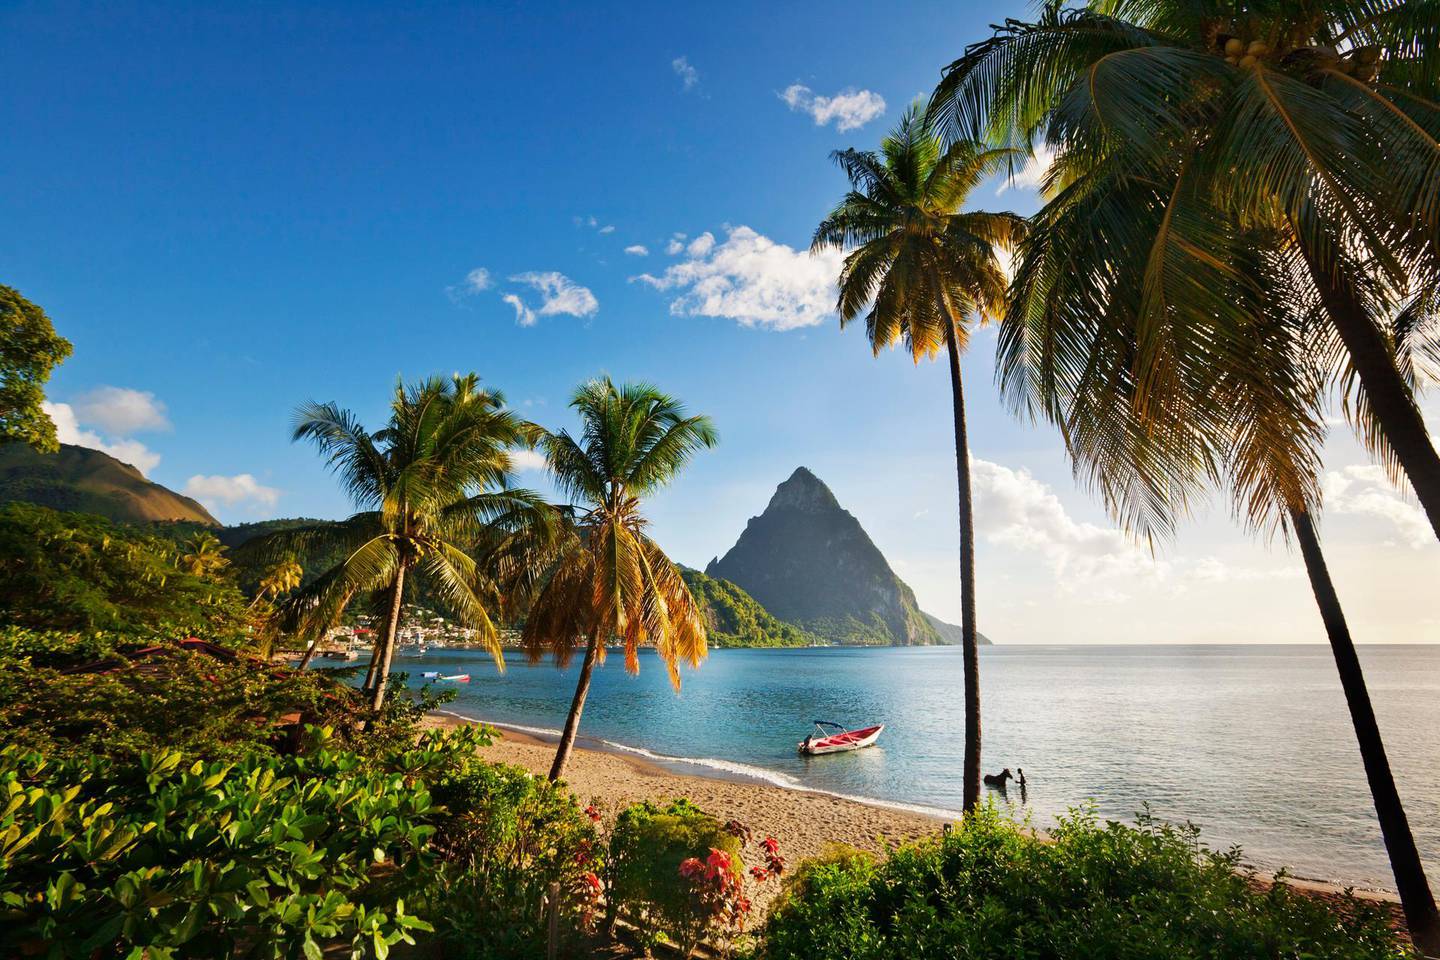 A view from Saint Lucia. If people are given the choice of working from anywhere, housing bubbles may begin to pop up in the most unexpected corners of the world. Courtesy St Lucia Tourism Authority